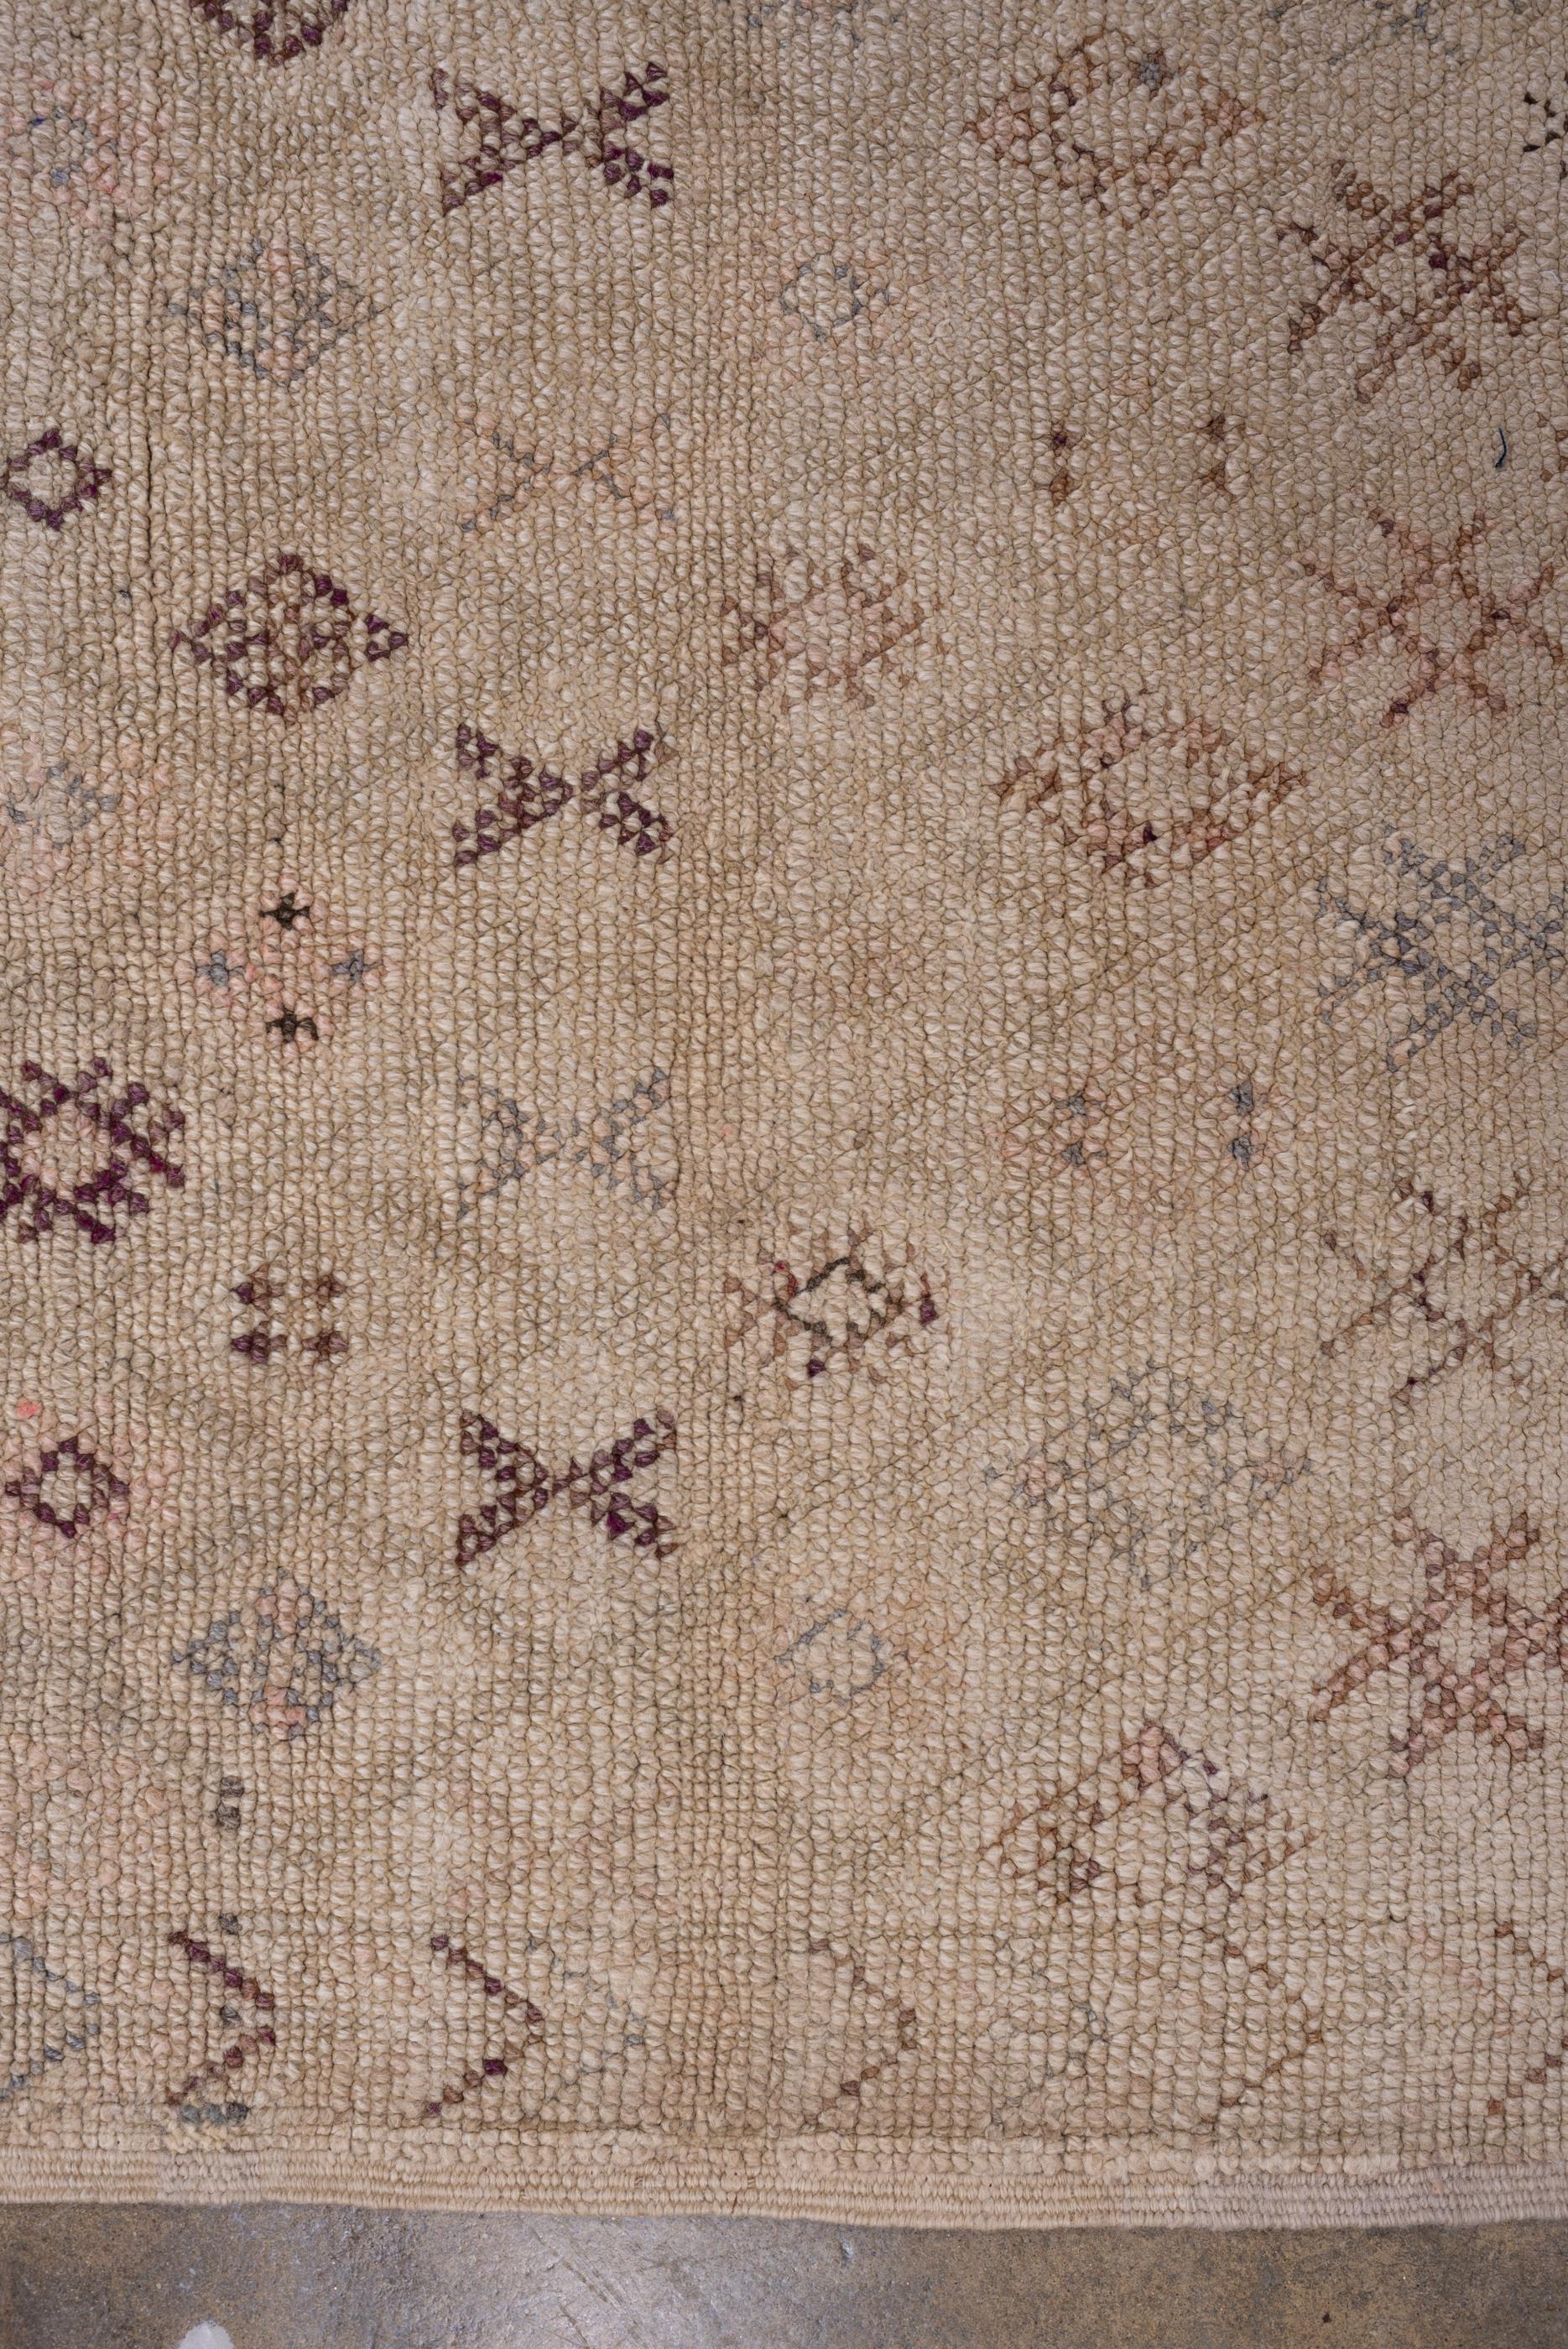 20th Century Rustic Moroccan Rug with Tan Field 